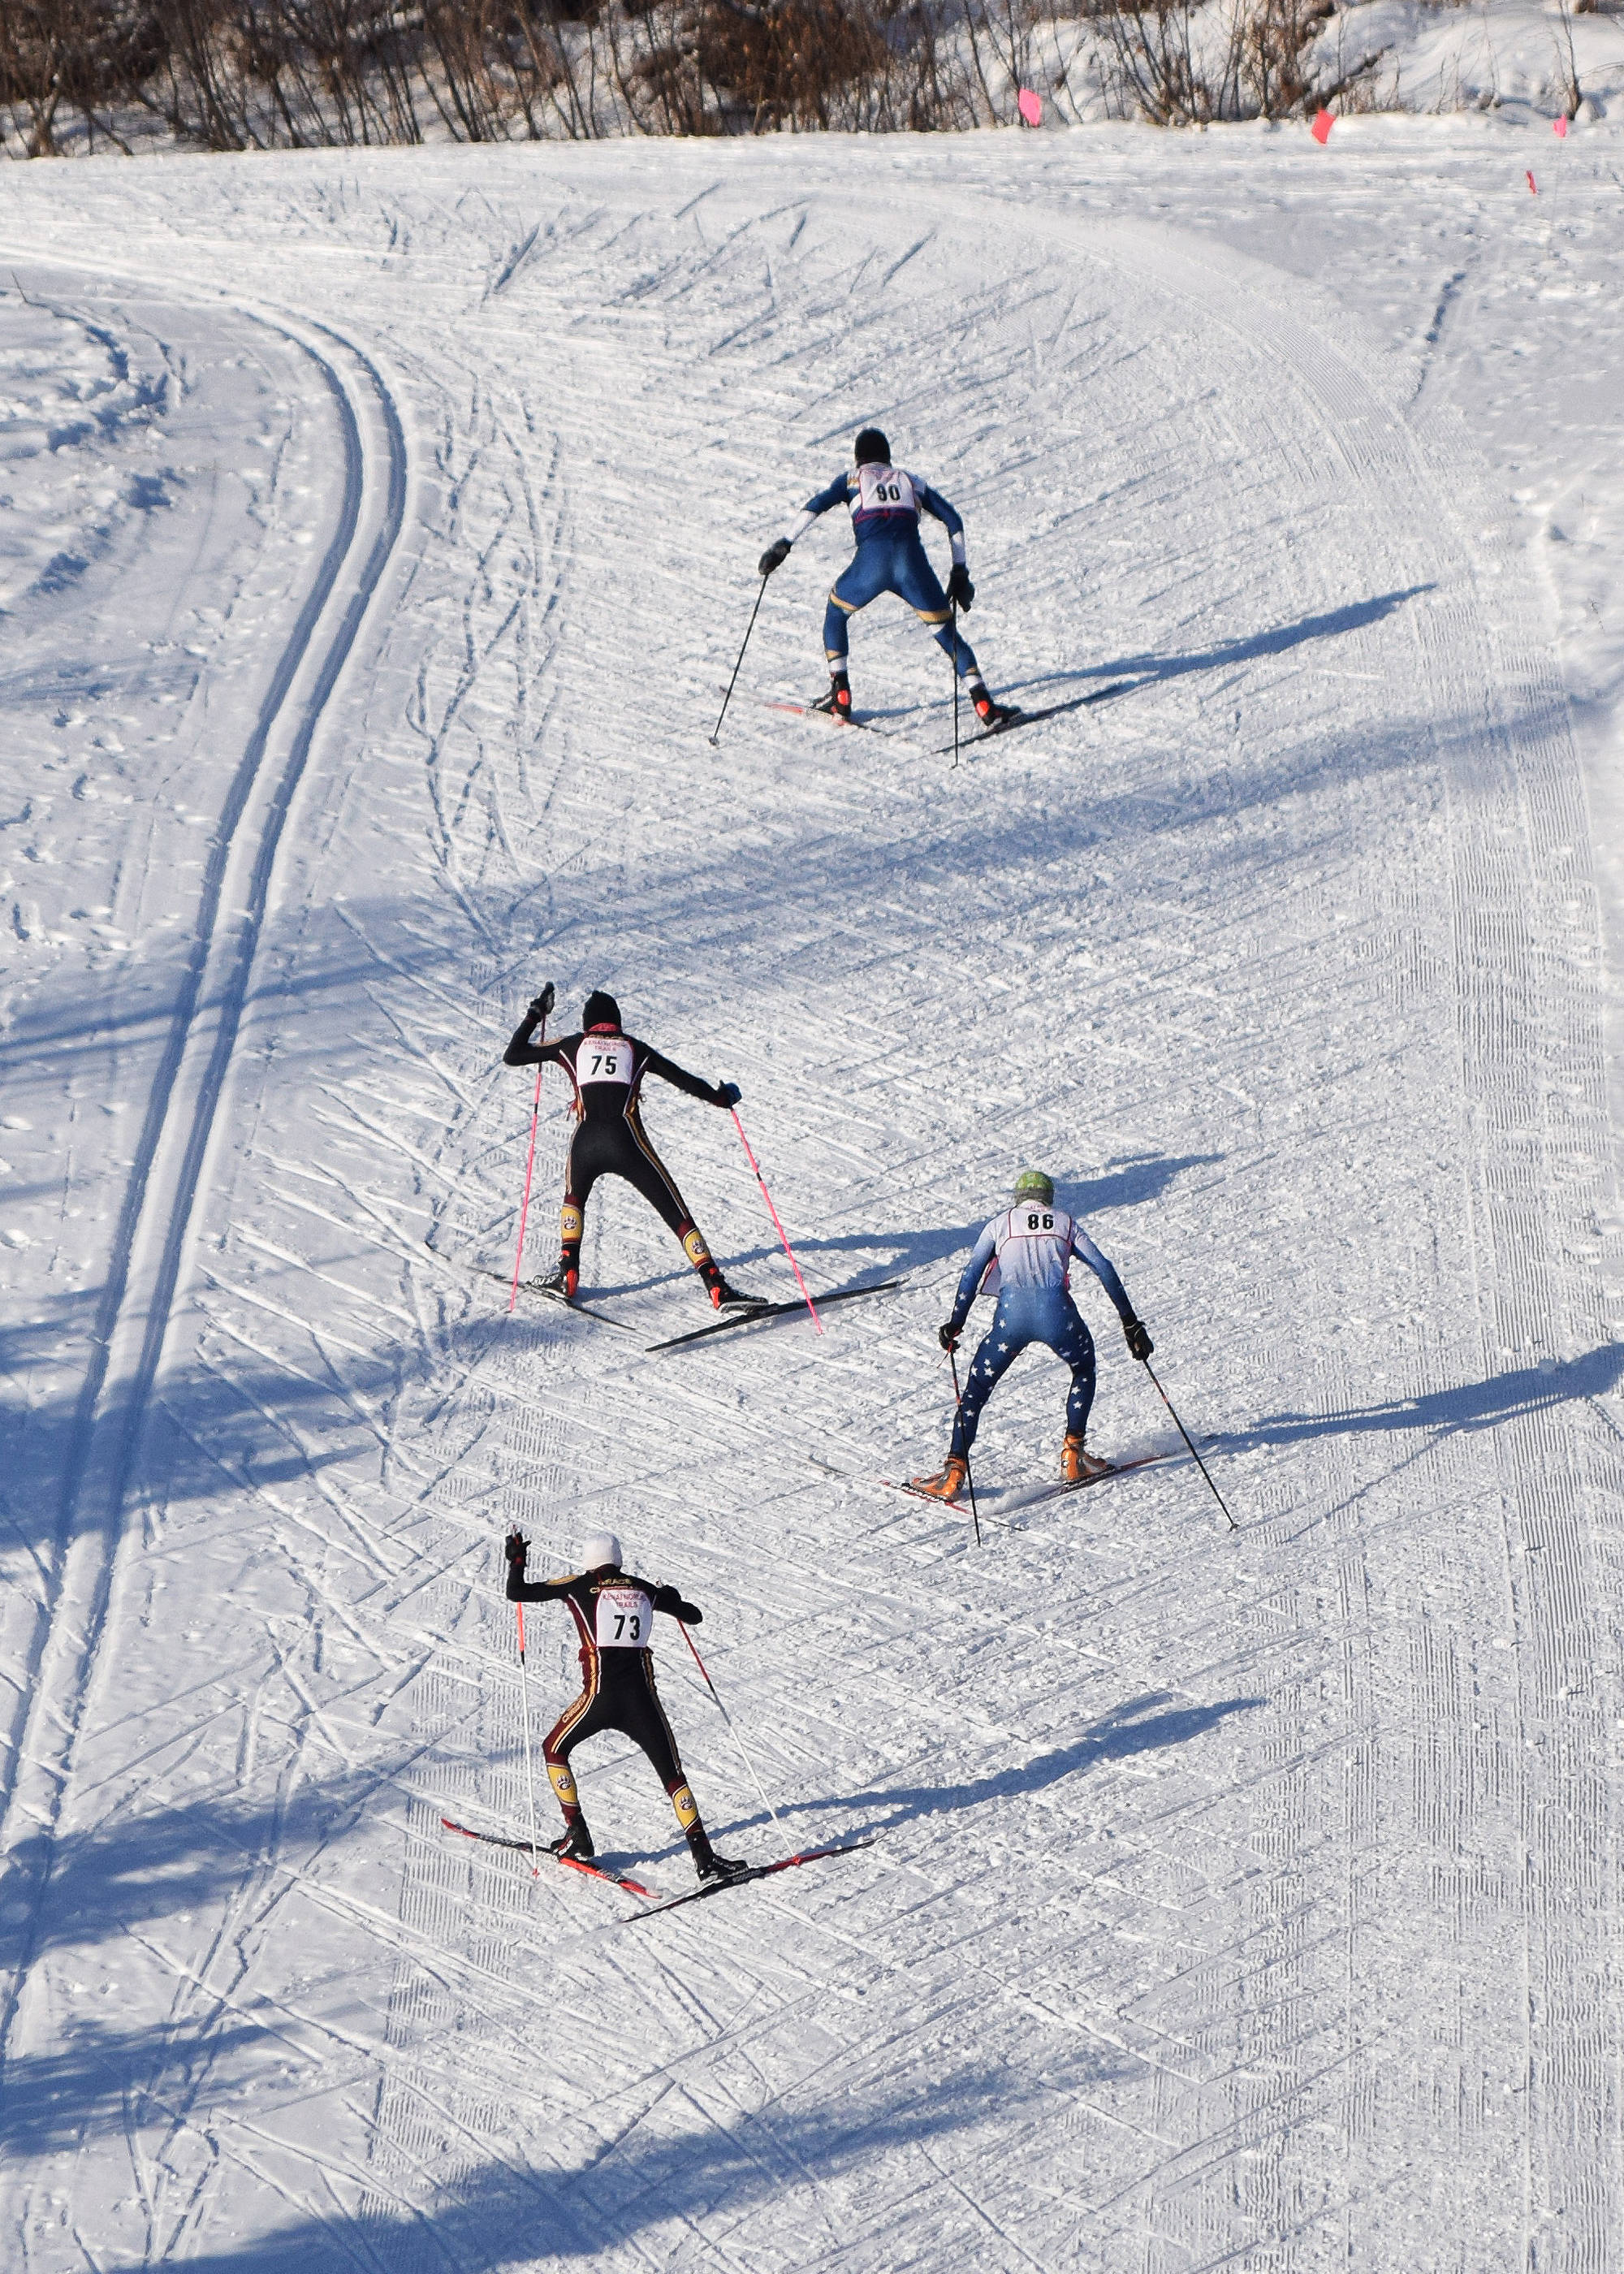 A group of skiers race up a hill late in the boys varsity race Friday afternoon in the Kenai Klassic races at the Tsalteshi Trails in Soldotna. (Photo by Joey Klecka/Peninsula Clarion)